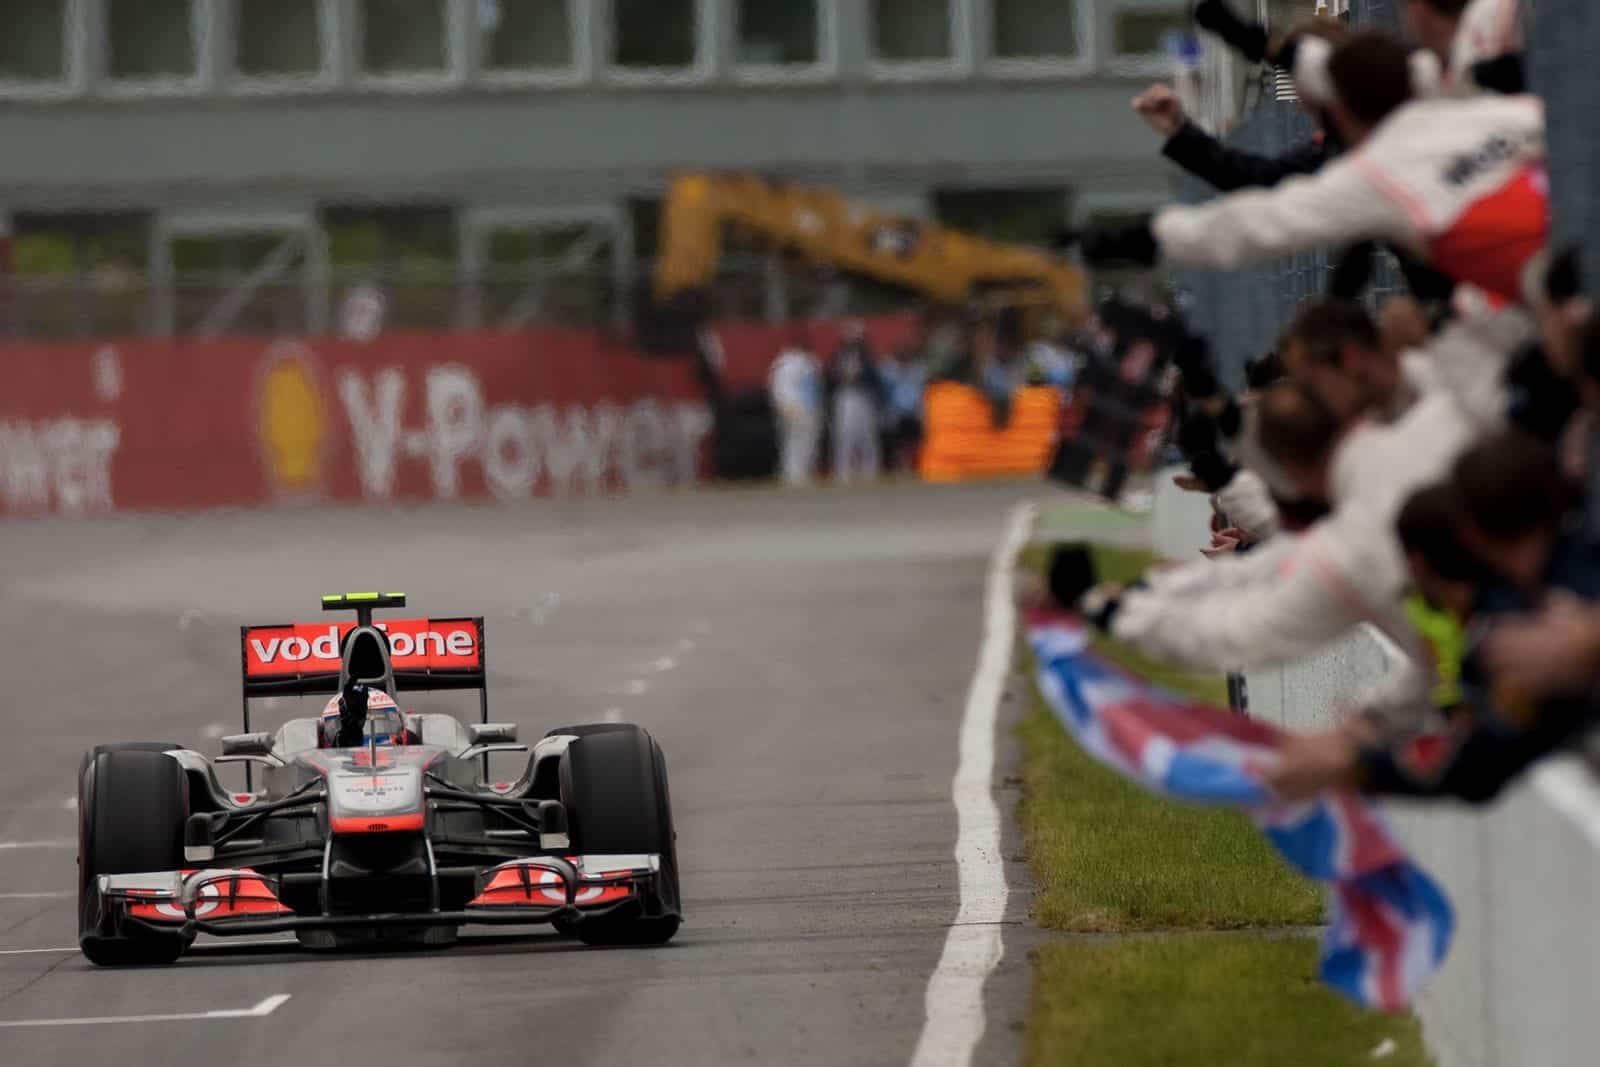 Jenson Button raises his hand in victory after winning the 2011 canadian grand prix